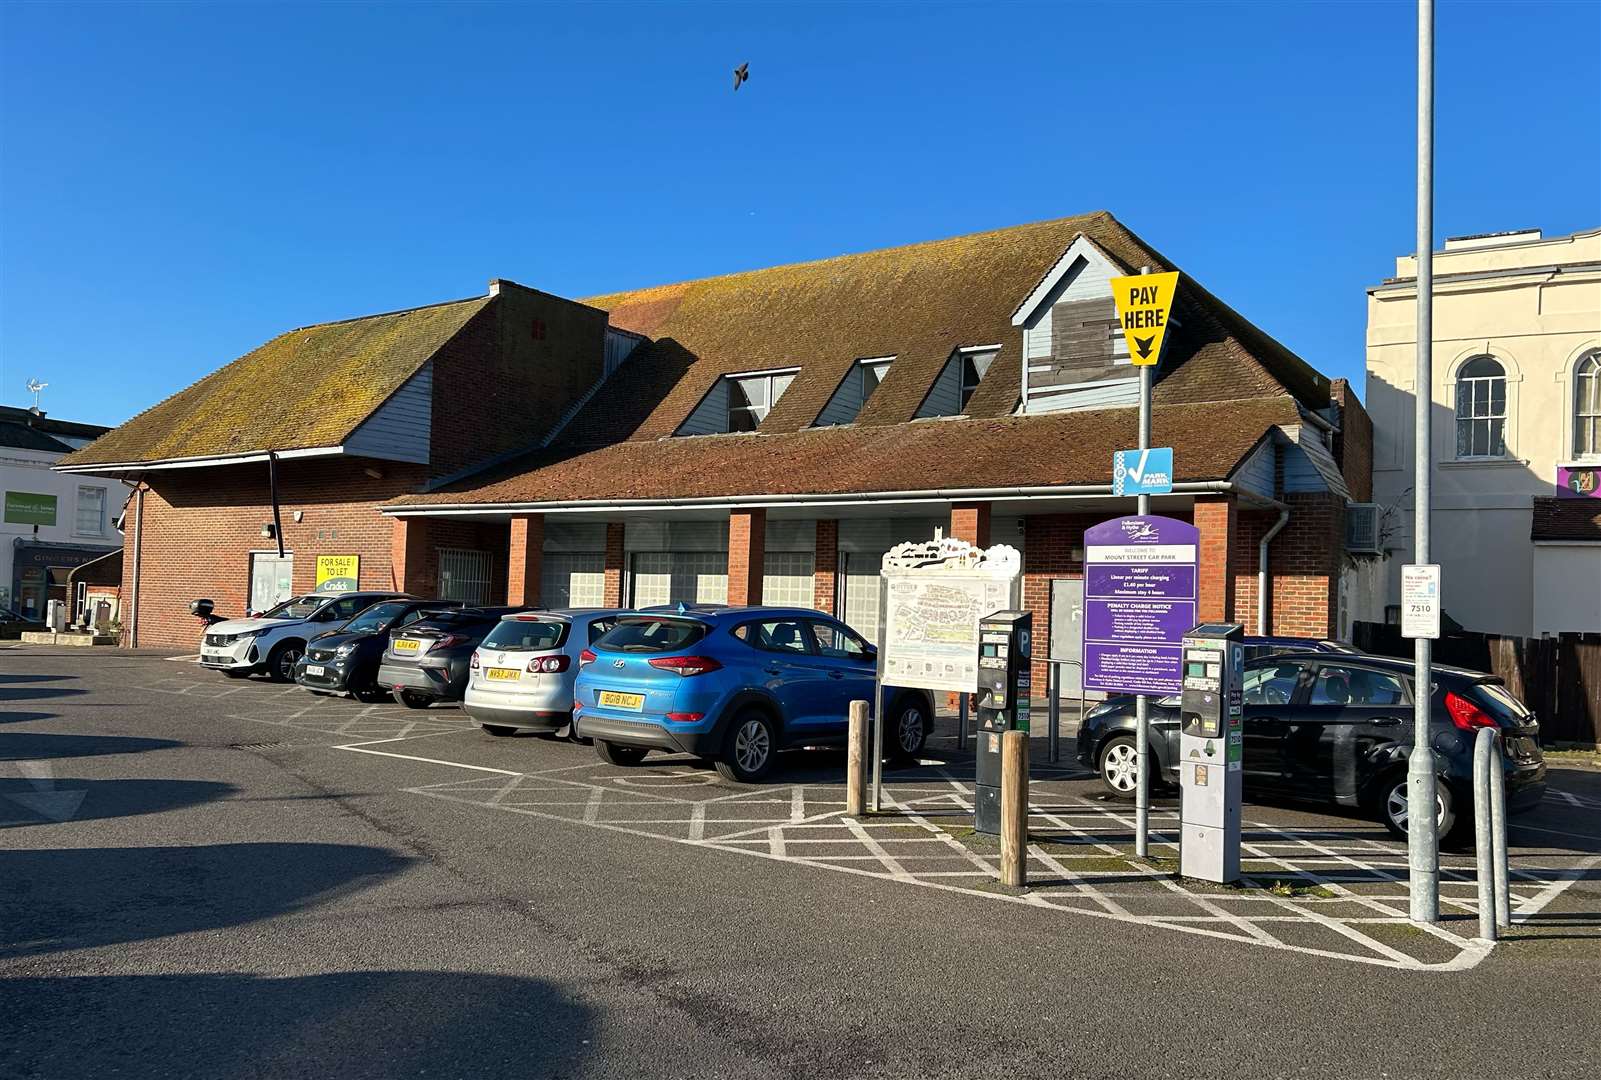 The large former Aldi building in Hythe has now been empty for more than four years